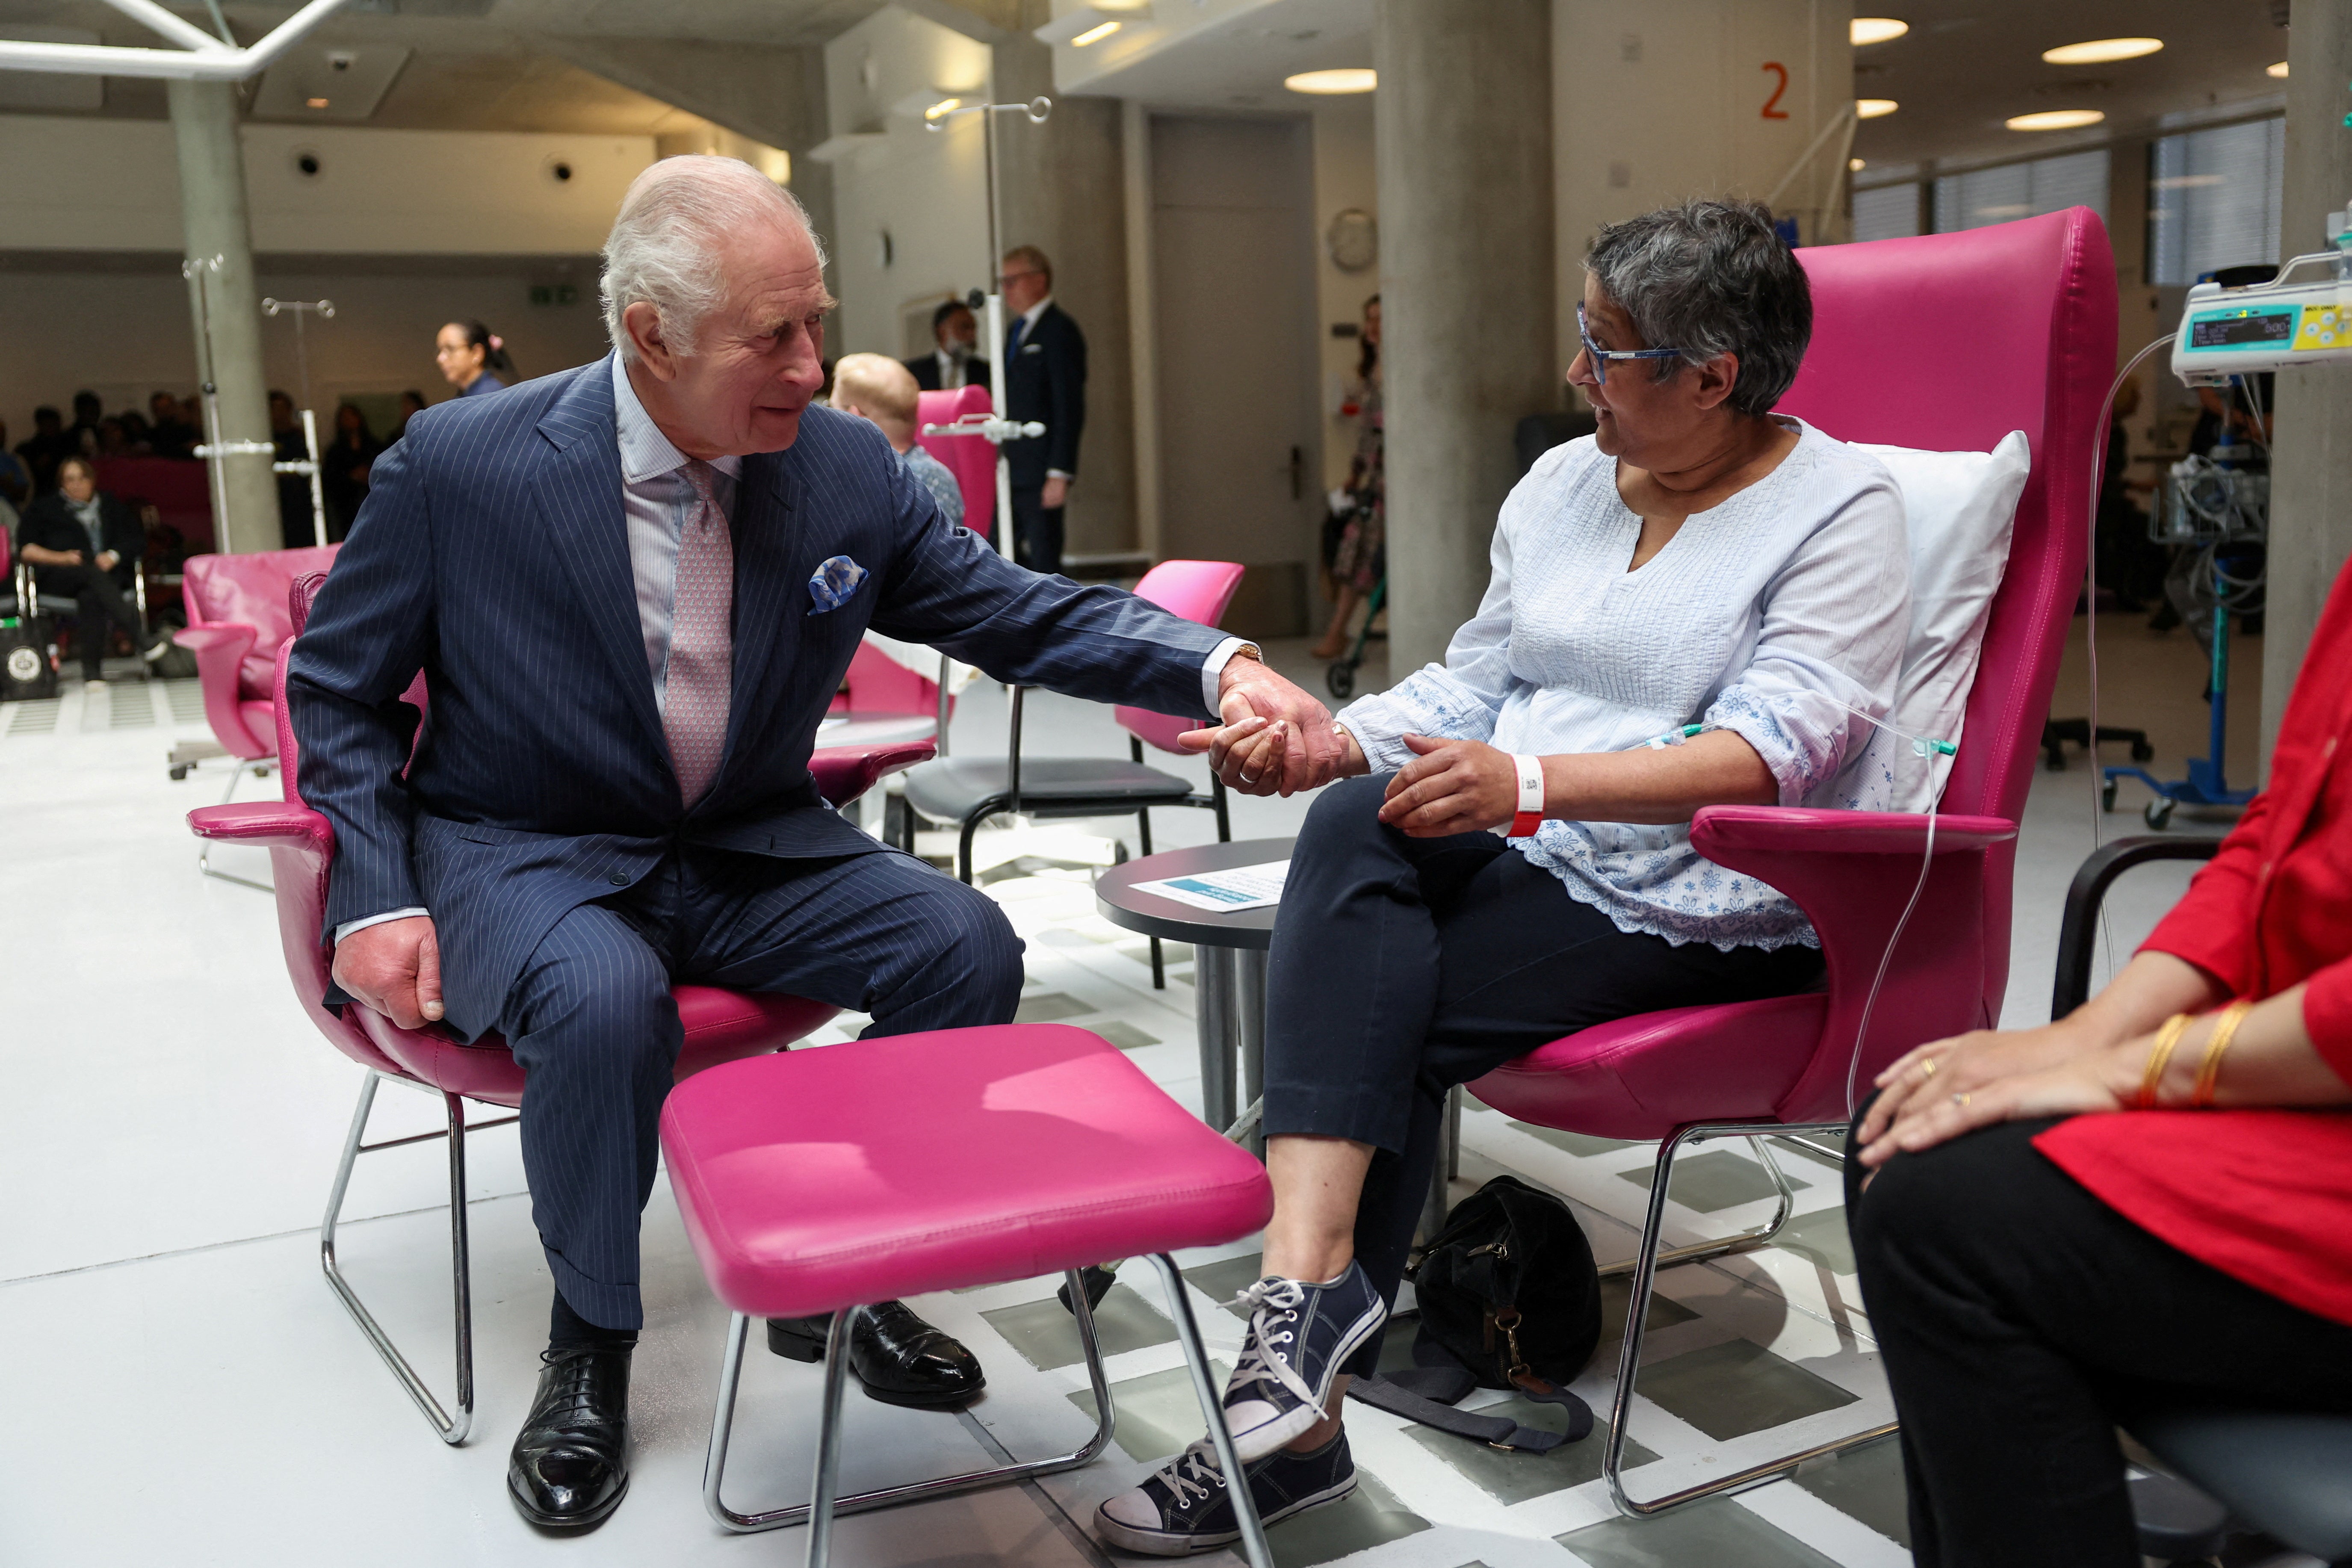 The King empathised with patients on his visit to a cancer treatment centre this morning